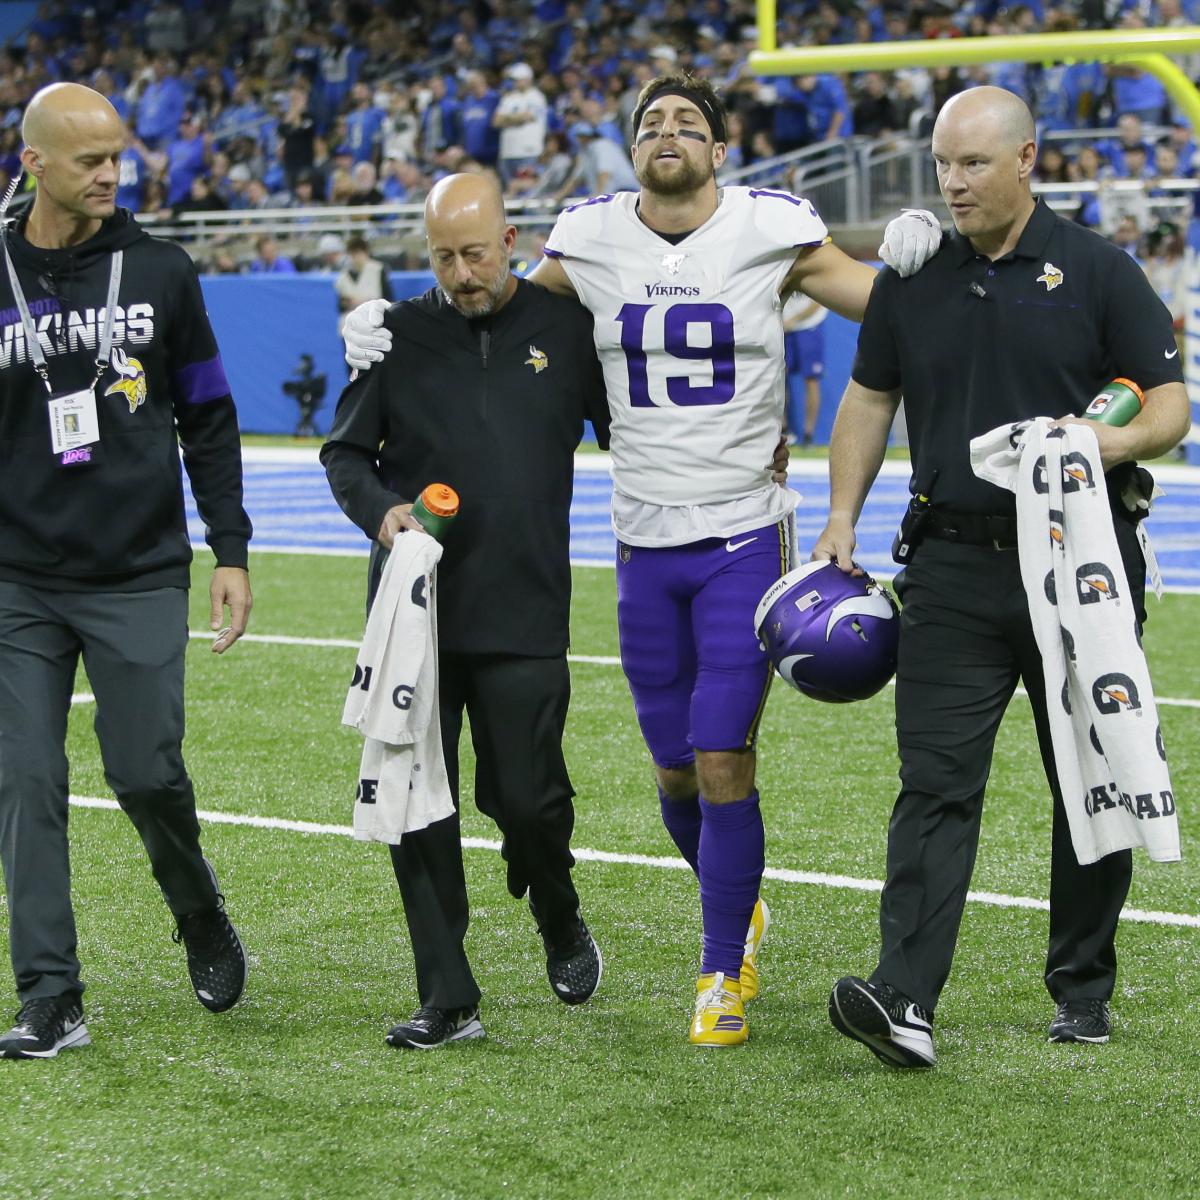 Report: Adam Thielen Avoids Serious Injury, Likely out for Vikings vs